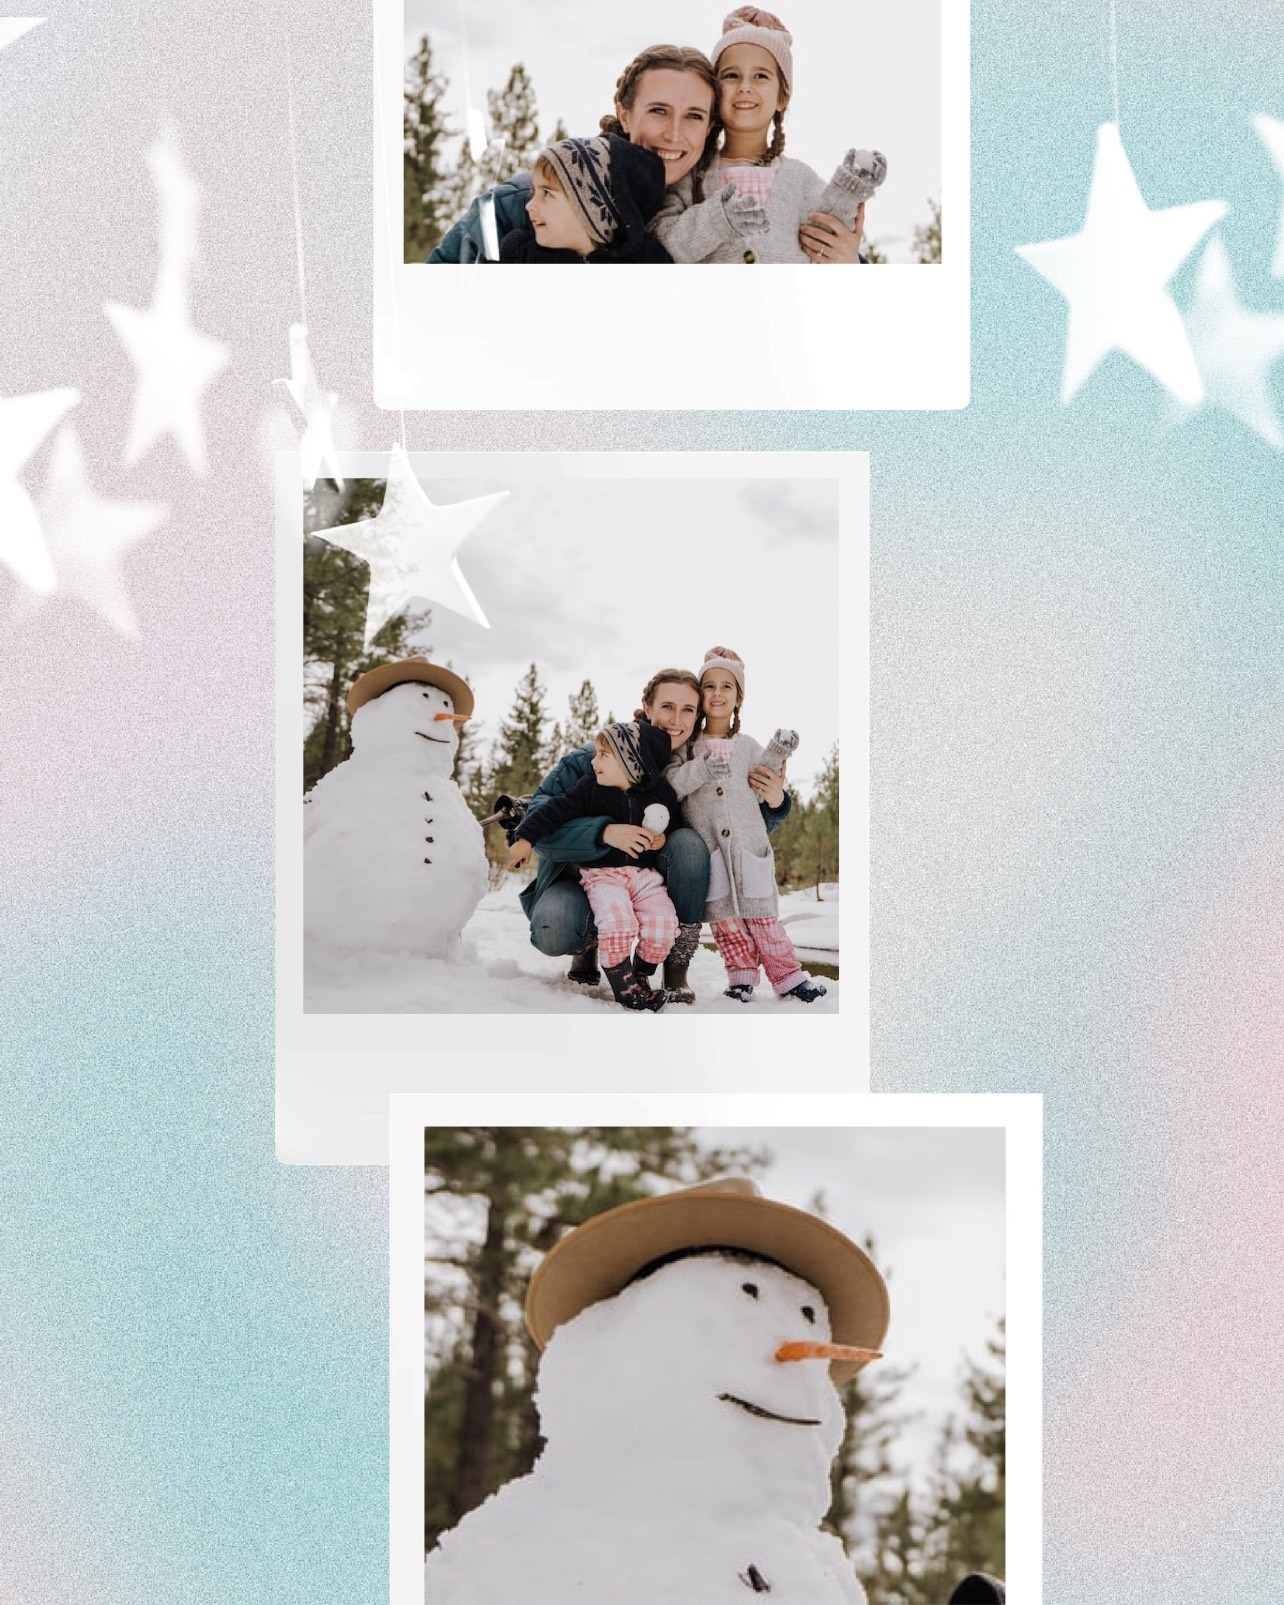 A Group Of People Standing Next To A Snowman Winter Wonderland Template